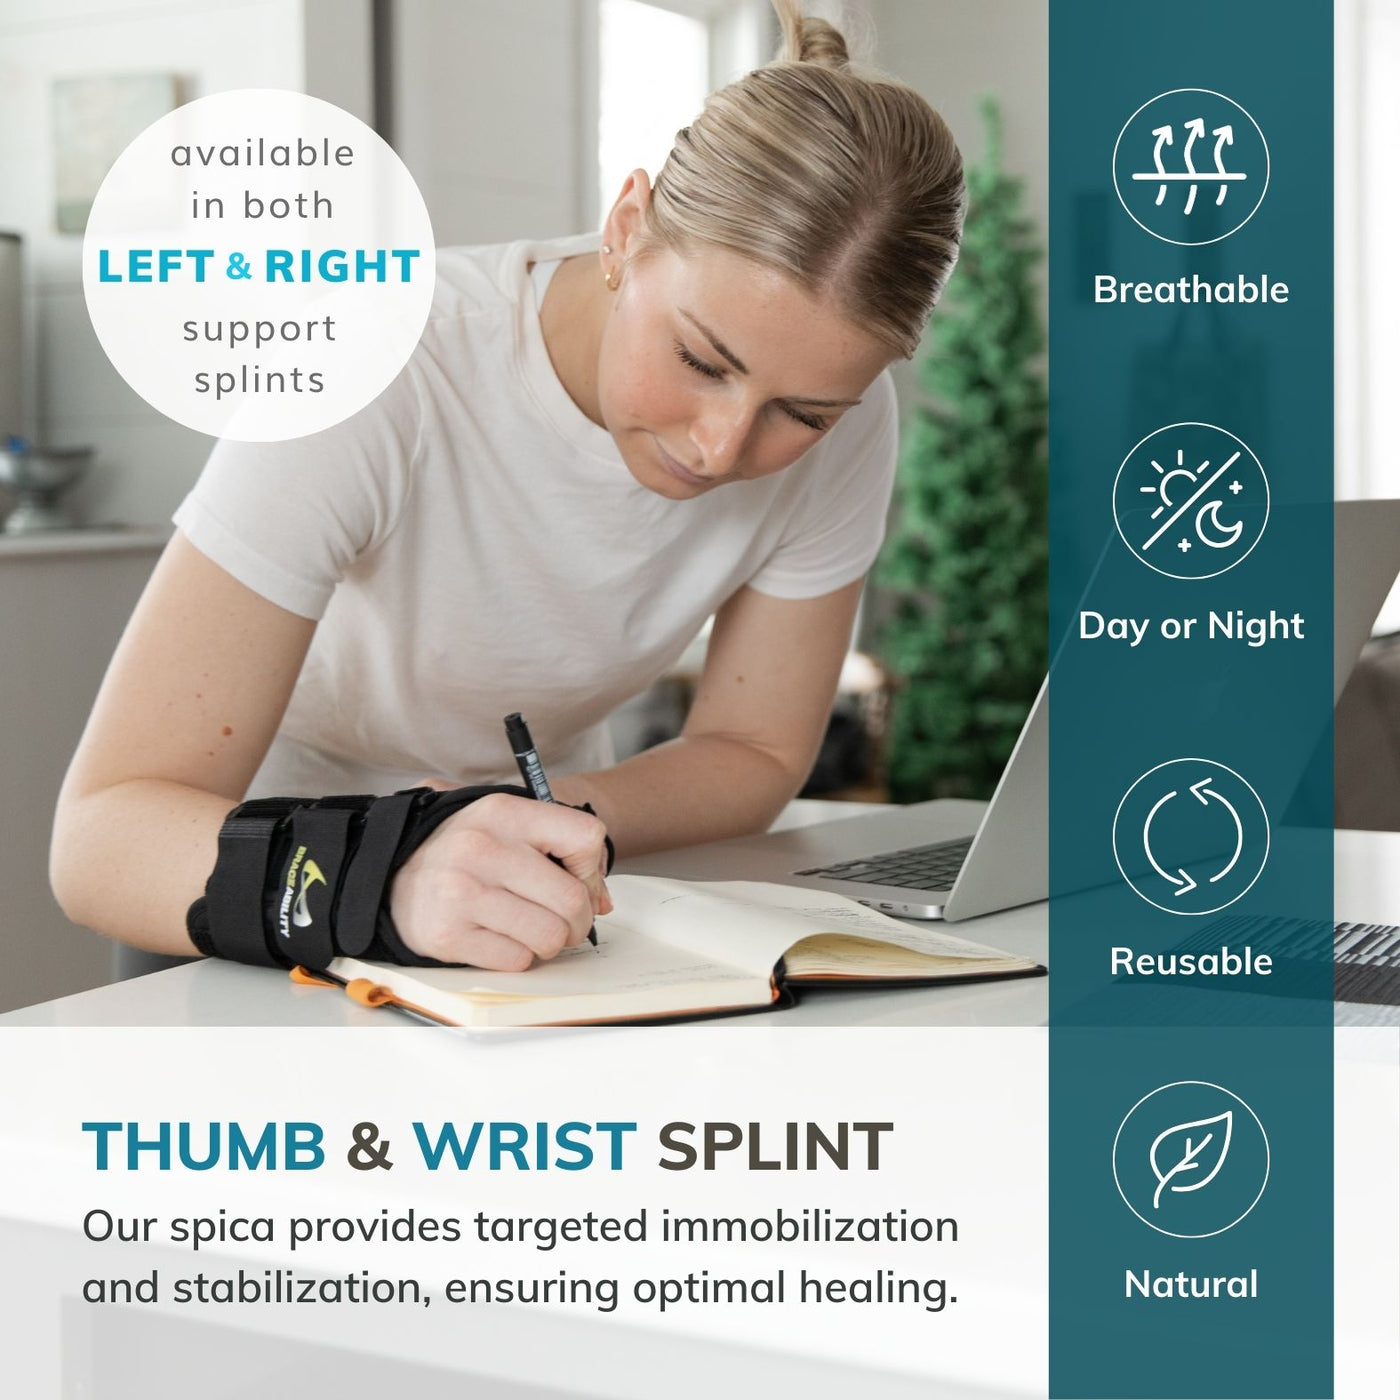 Wear the De Quervains tenosynovitis splint on your left or right hand for breathable all day support